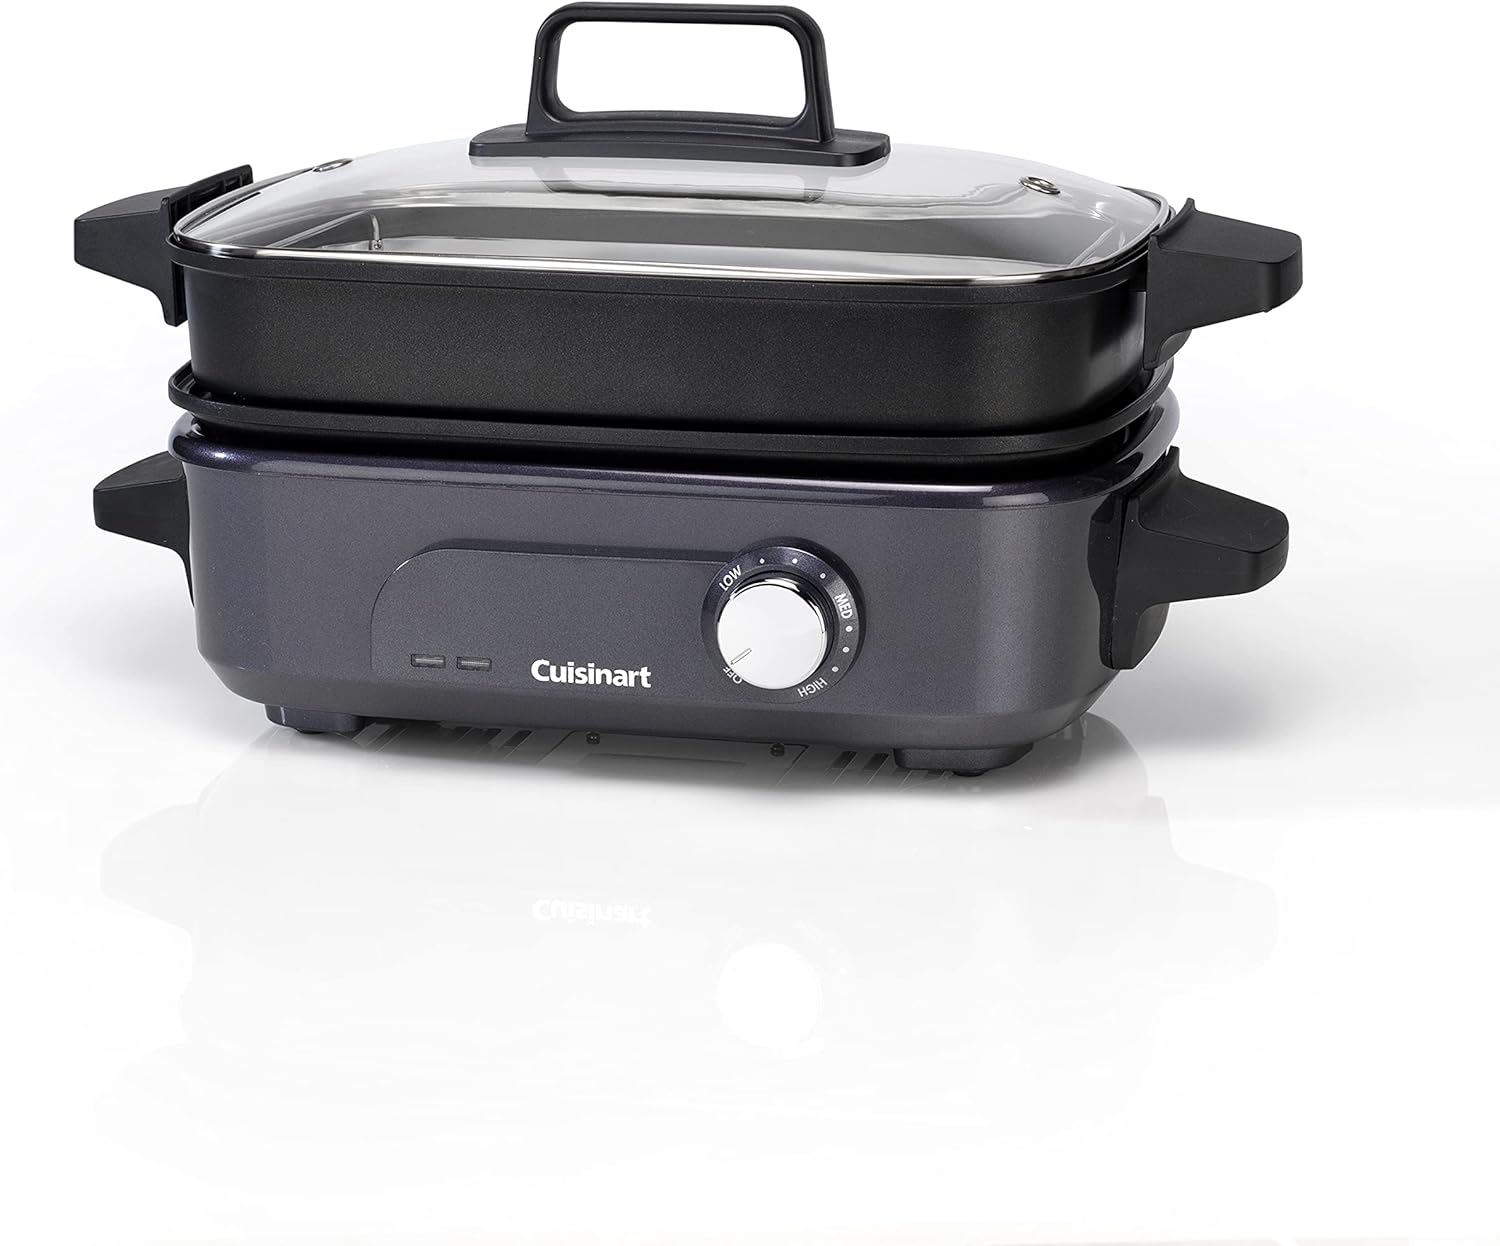 Cuisinart Cook in Grmc3u 5-in-1 Multi Cooker, Grill, Sear, Steam, Simmer and Cook, Non-Stick, Midnight Gray